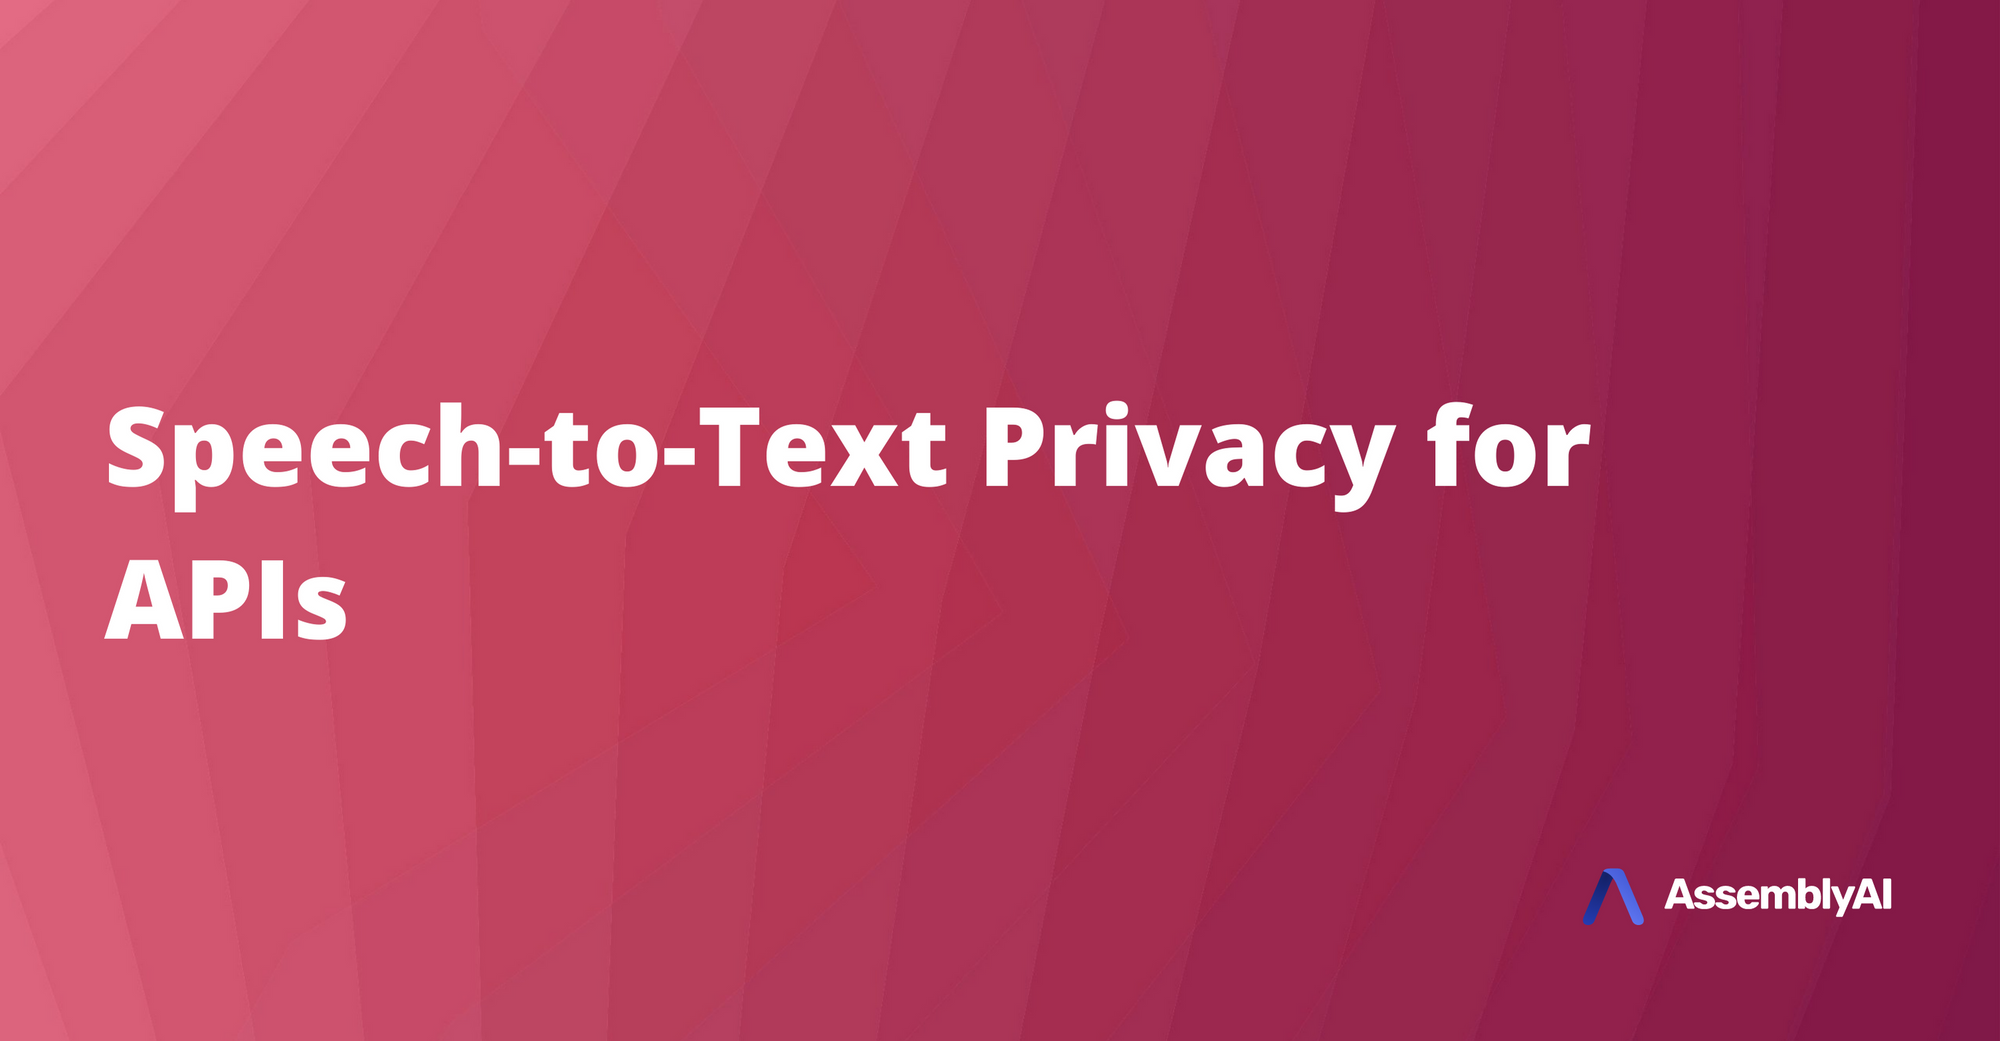 What to Know About Speech-to-Text Privacy